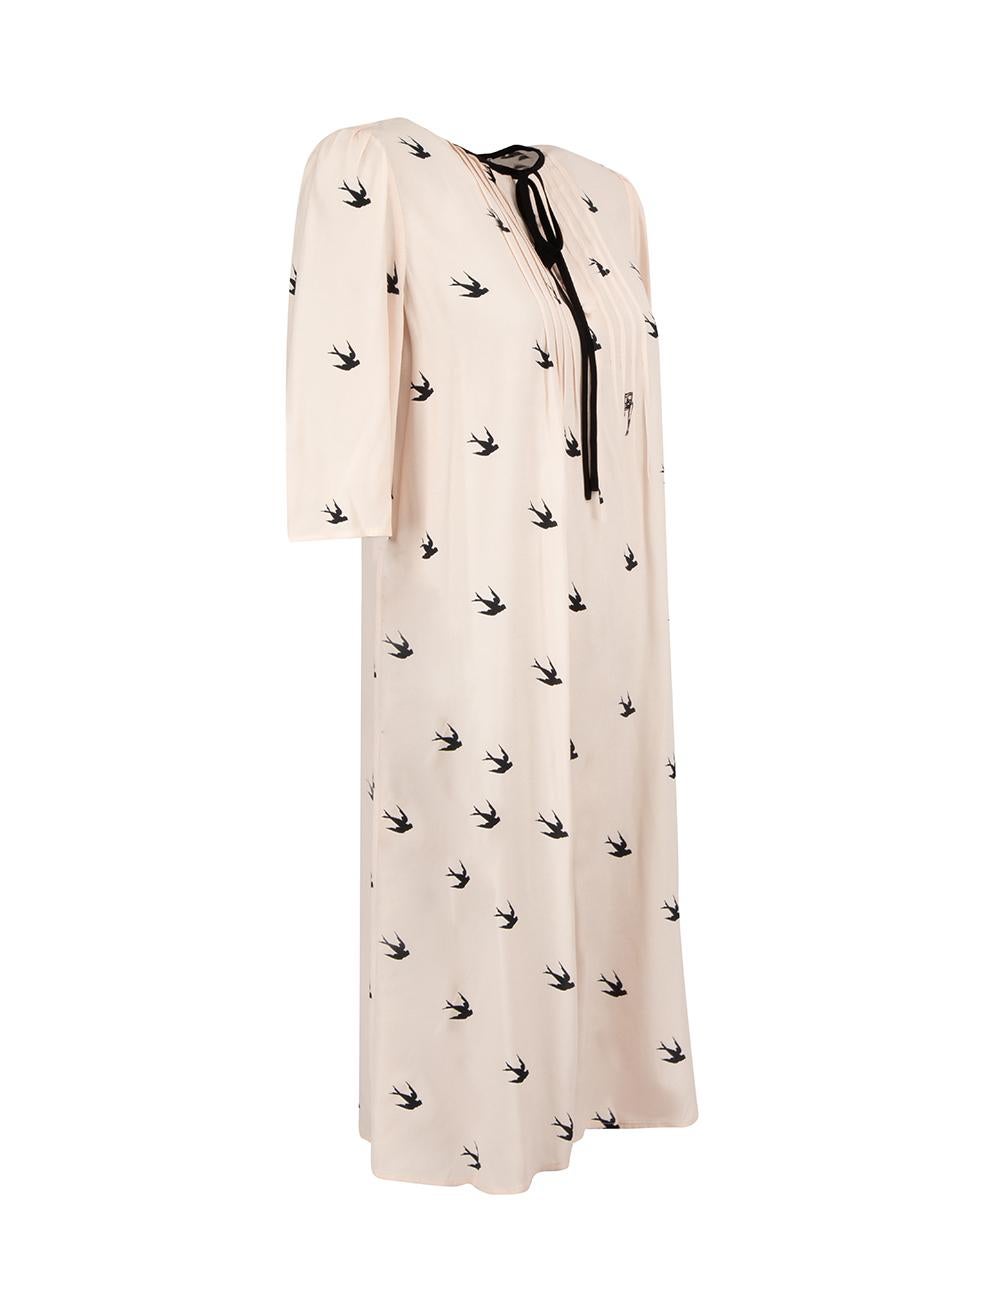 CONDITION is Never worn, with tags. Hardly any visible wear to dress is evident however small yellow marks found at interior side seam on this new McQ designer resale item.

Details
Pink
Synthetic
Dress
Swallow print
1/2 Sleeves
Round neck
Button